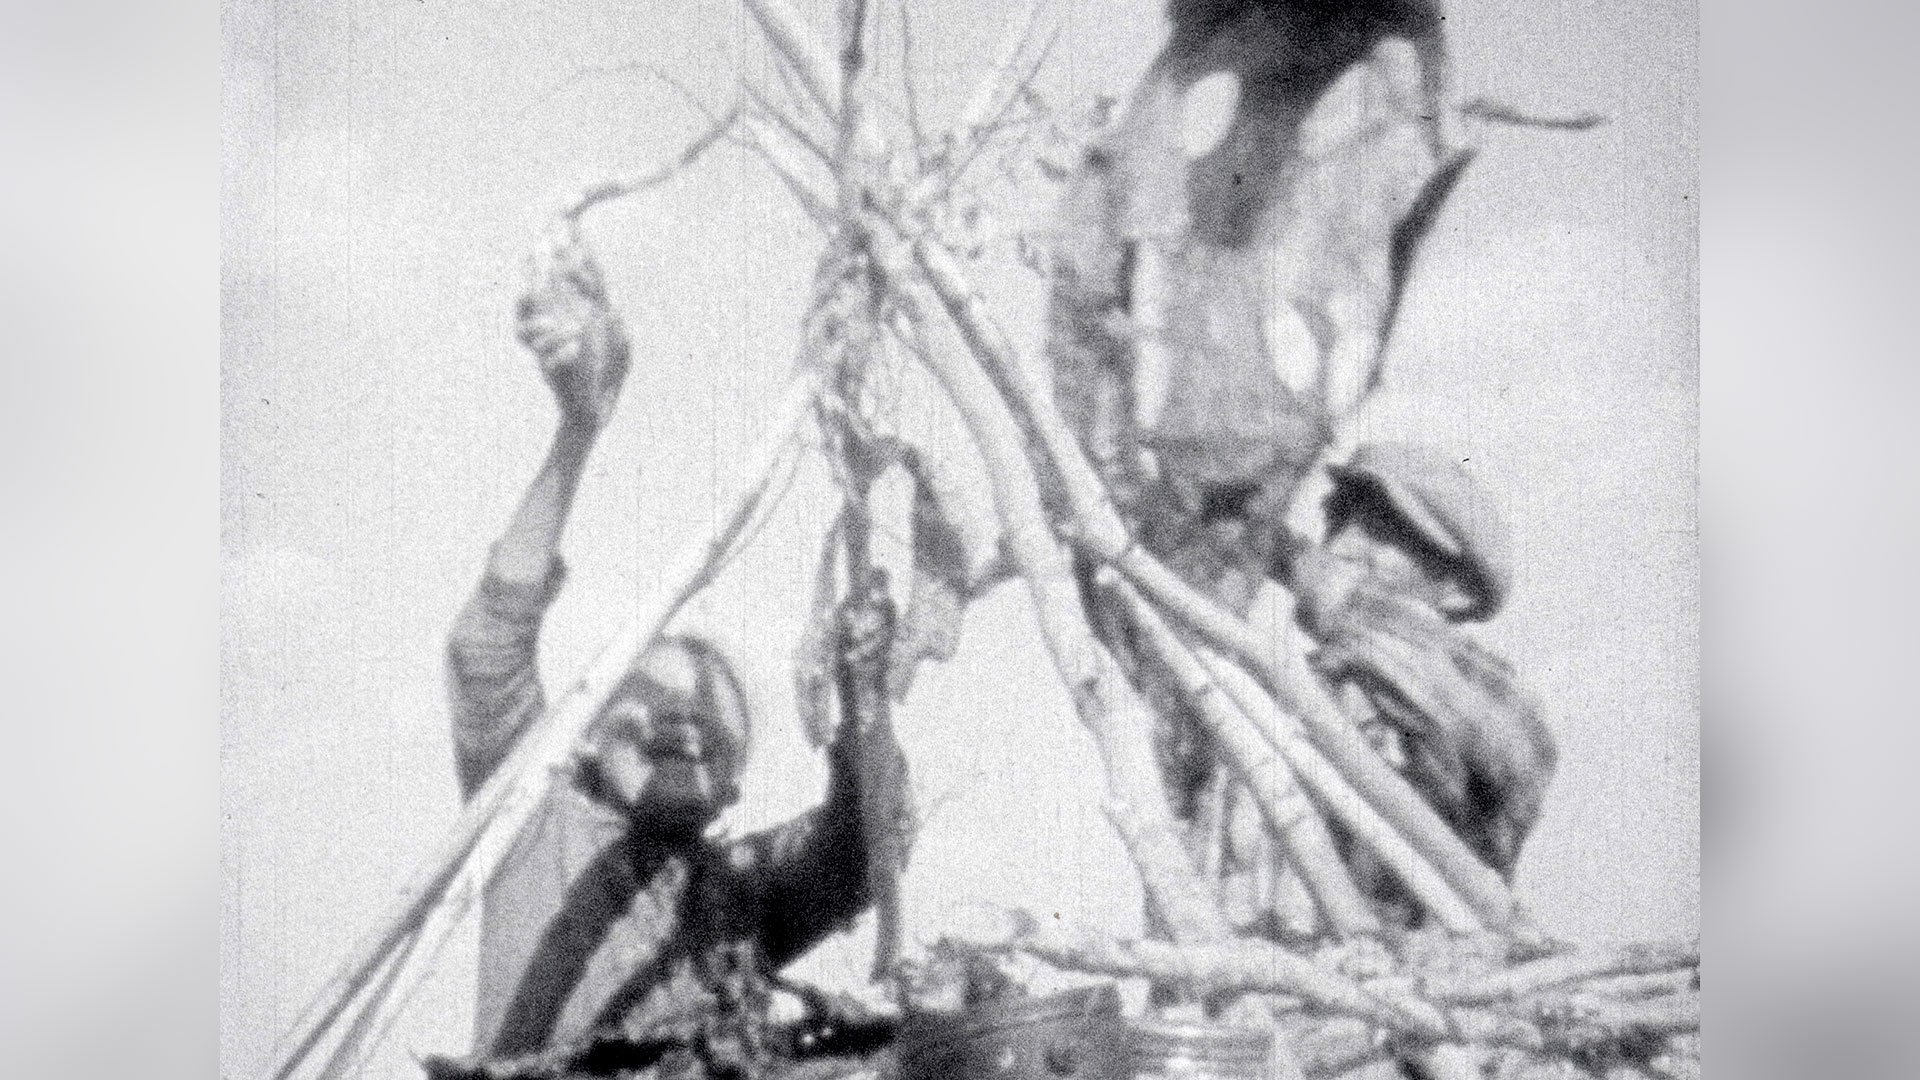 : Two figures appear assembling a structure made of wooden branches forming a point at the top. The image is a black and white film still of what appears to be archival footage.